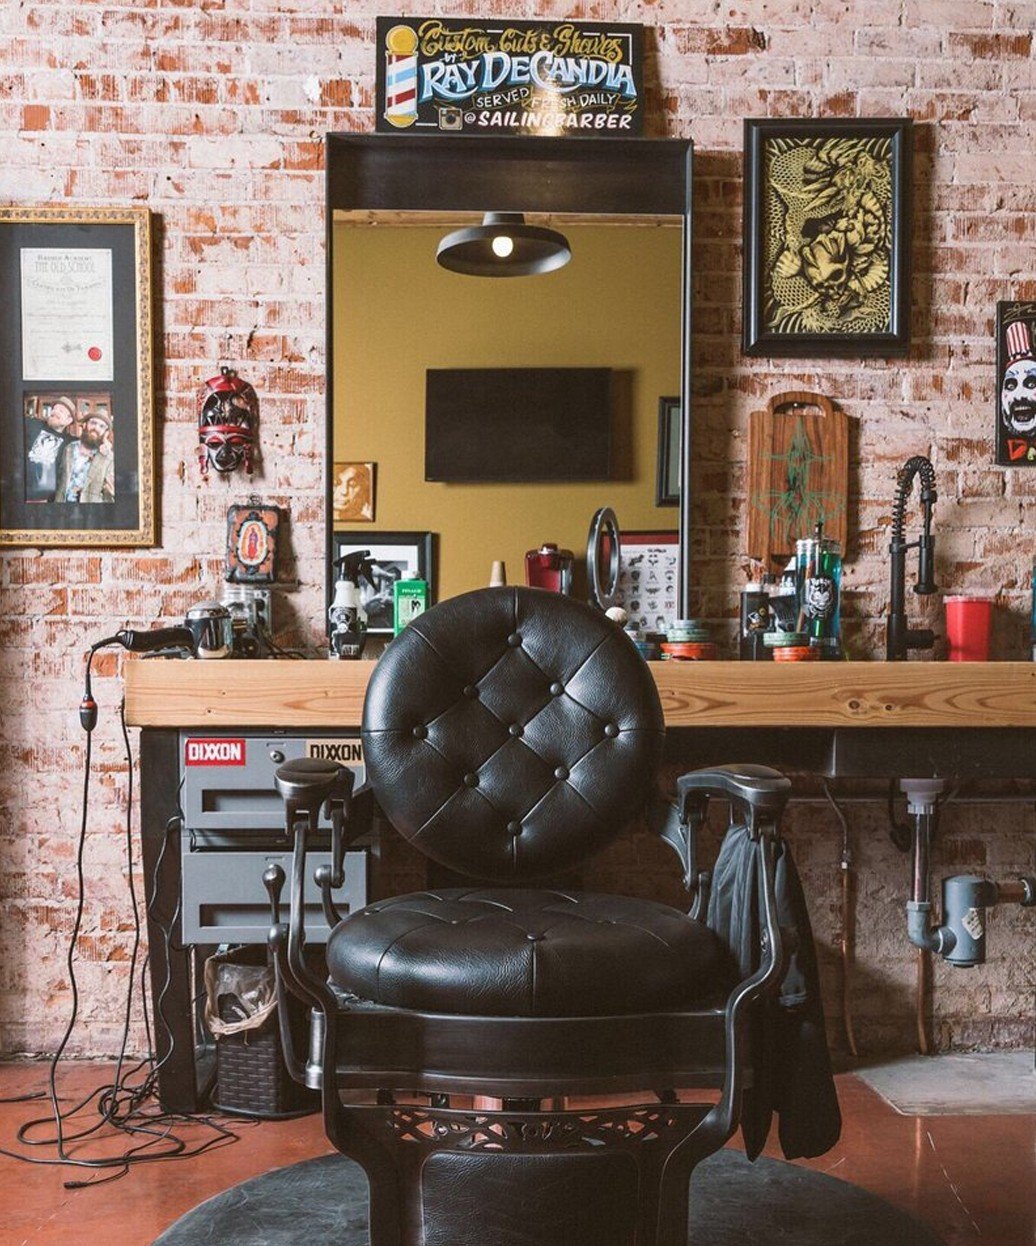 Alesso Professional Barber Chair